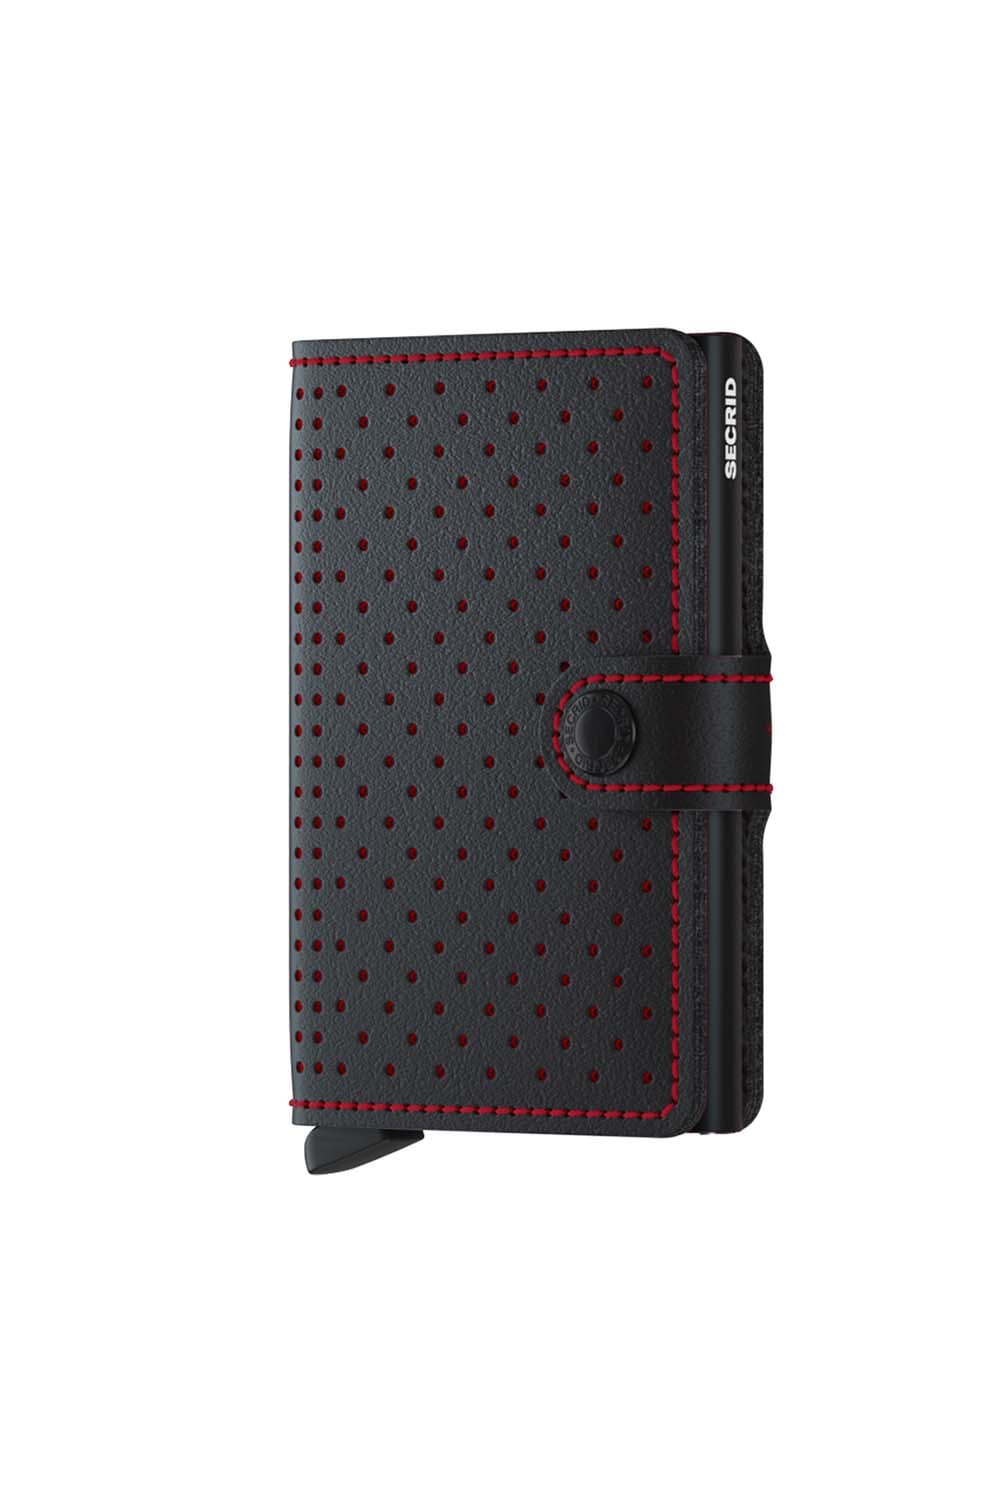 Secrid Miniwallet Perforated Black Red Ritzy Store